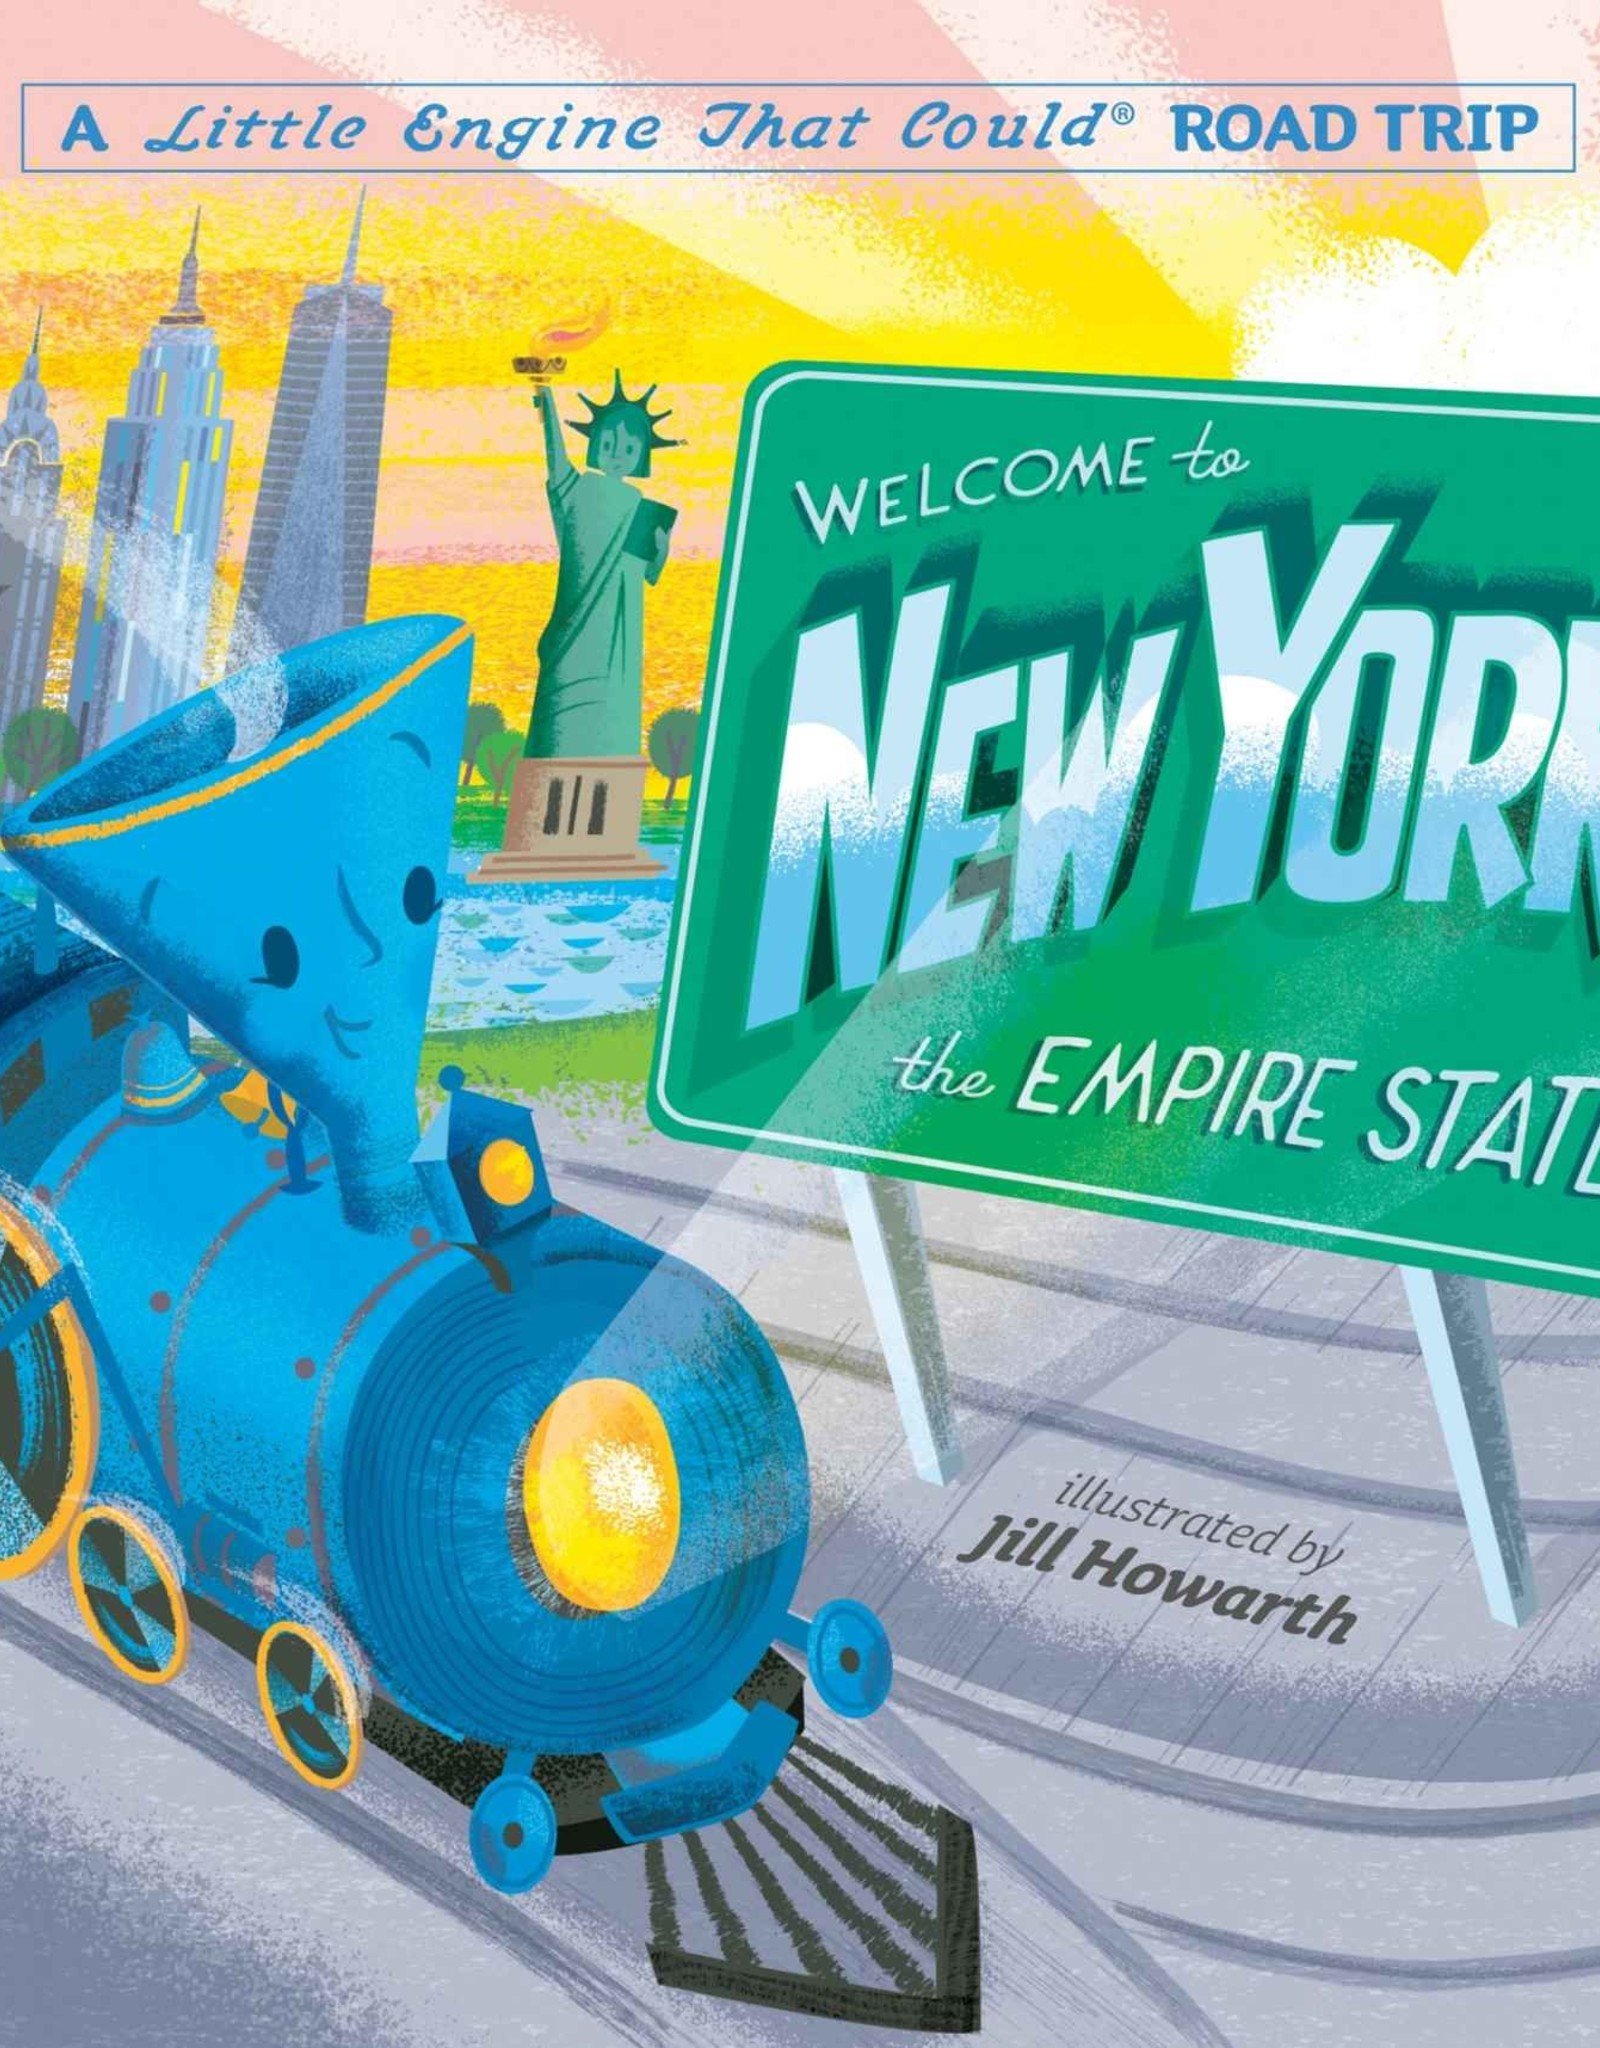 Penguin Random House Welcome To New York Board Book